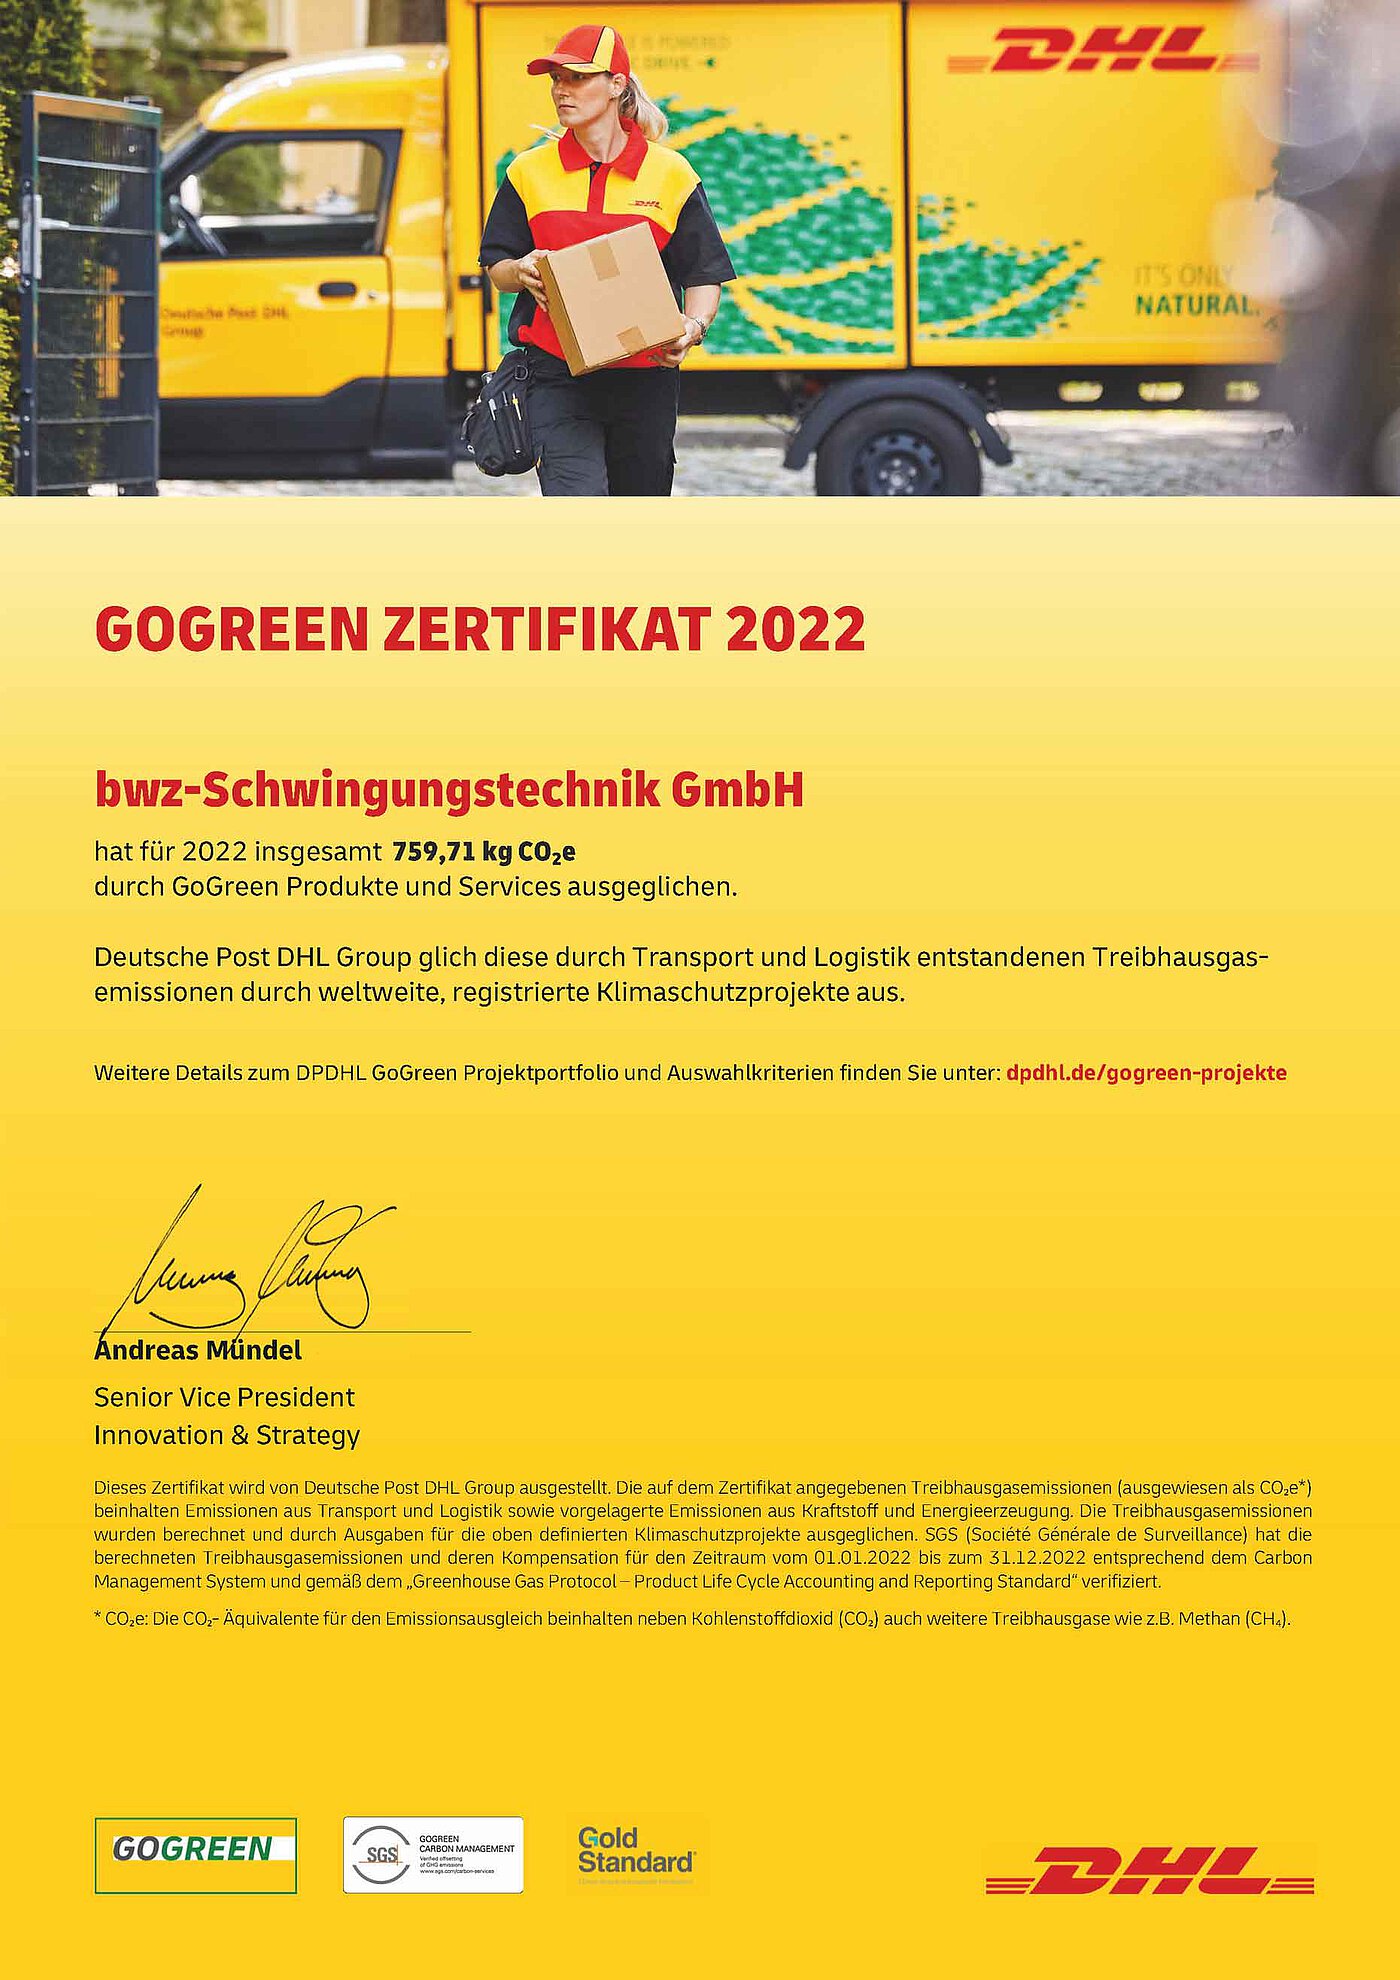 a yellow certificate issued by logistics provider DHL, mentioning that by using the product DHL GoGreen, bwz Schwingungstechnik has saved 759,71 KG CO2 equivalents in the year 2022